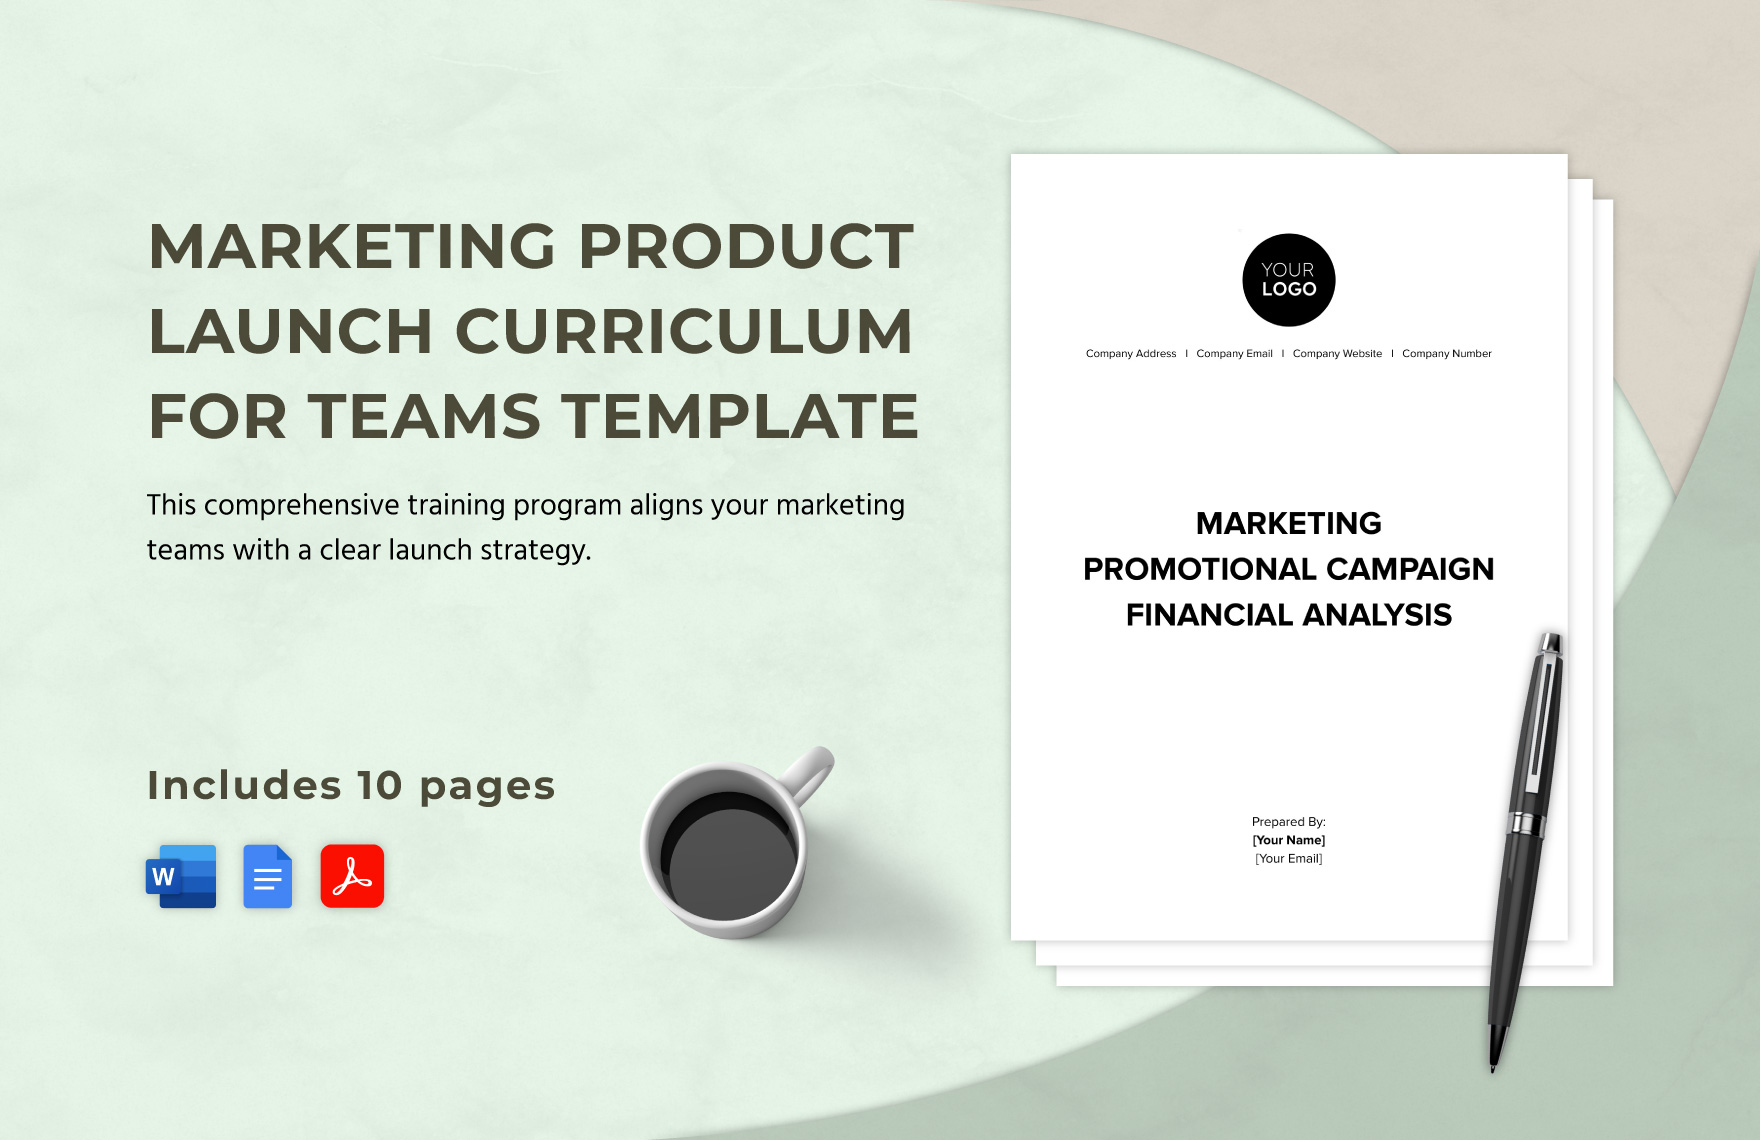 Marketing Product Launch Curriculum for Teams Template